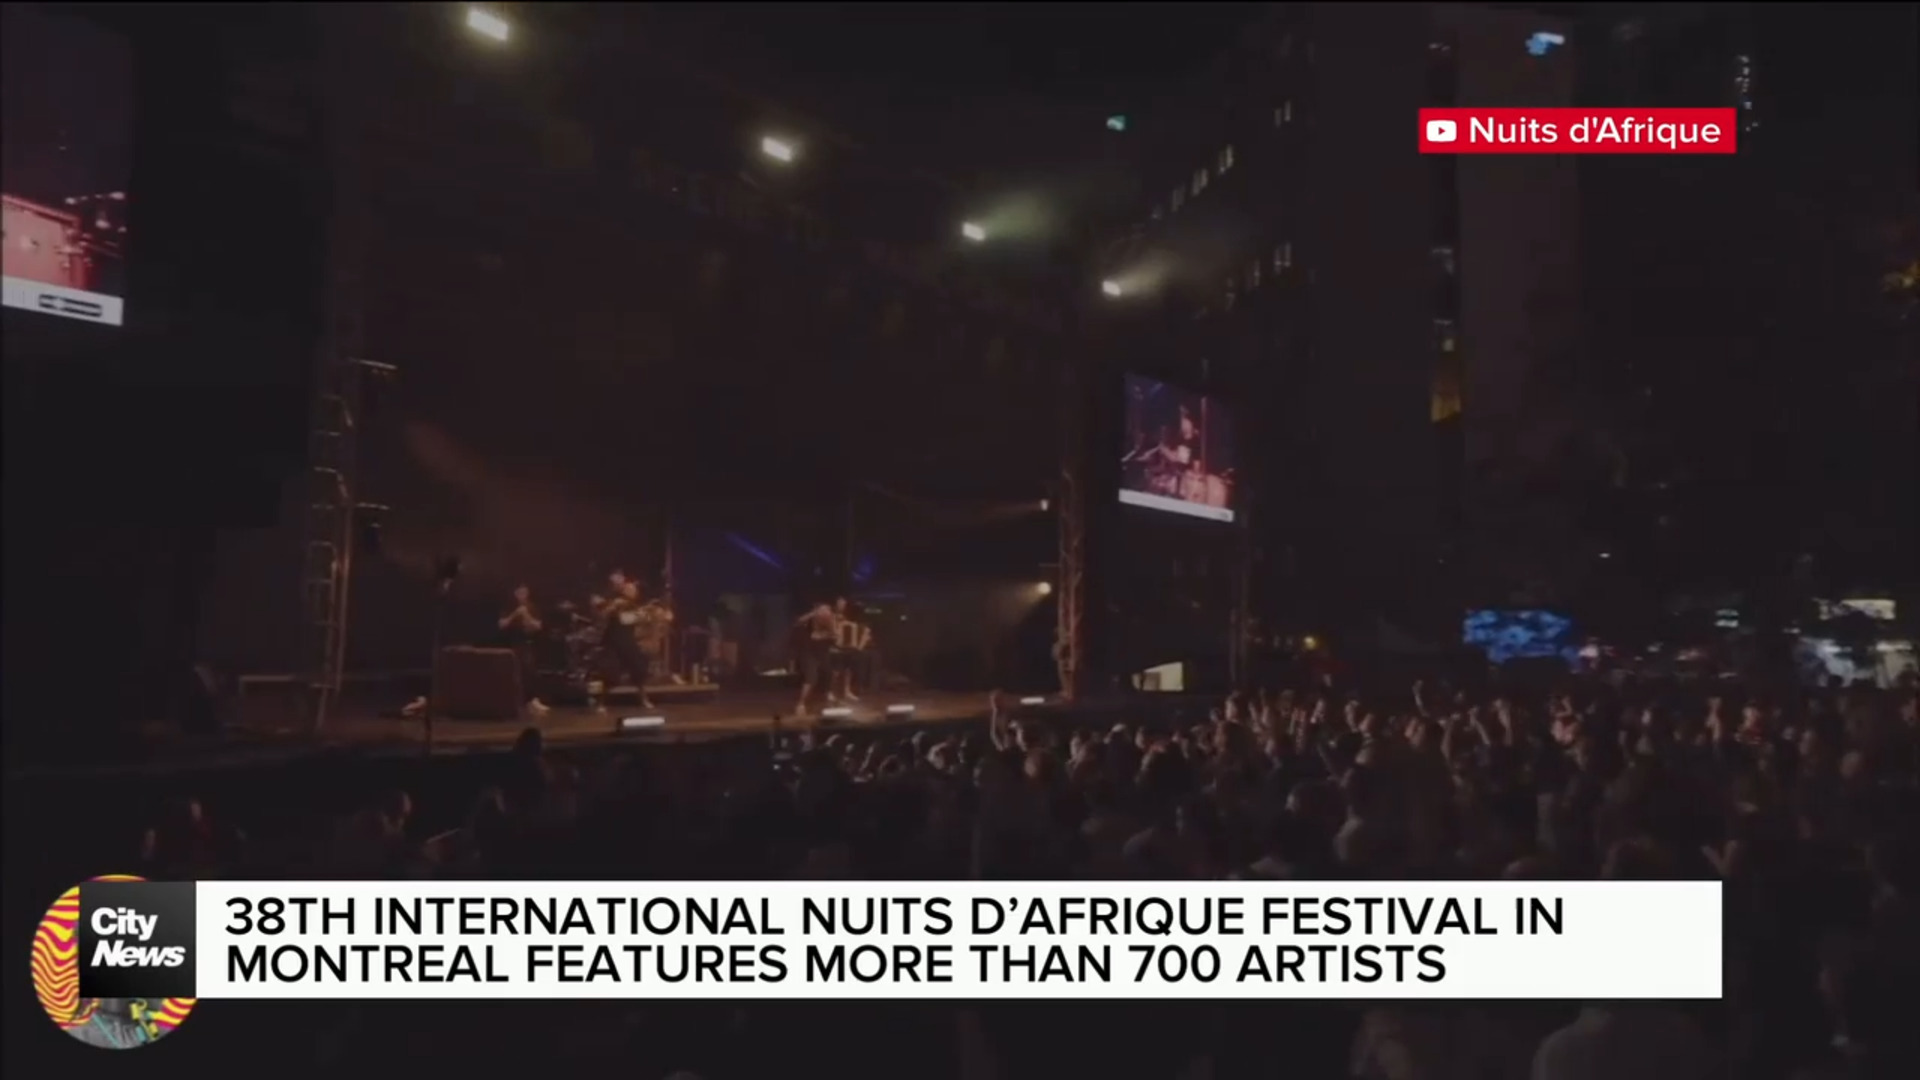 38th International Nuits d’Afrique Festival in Montreal